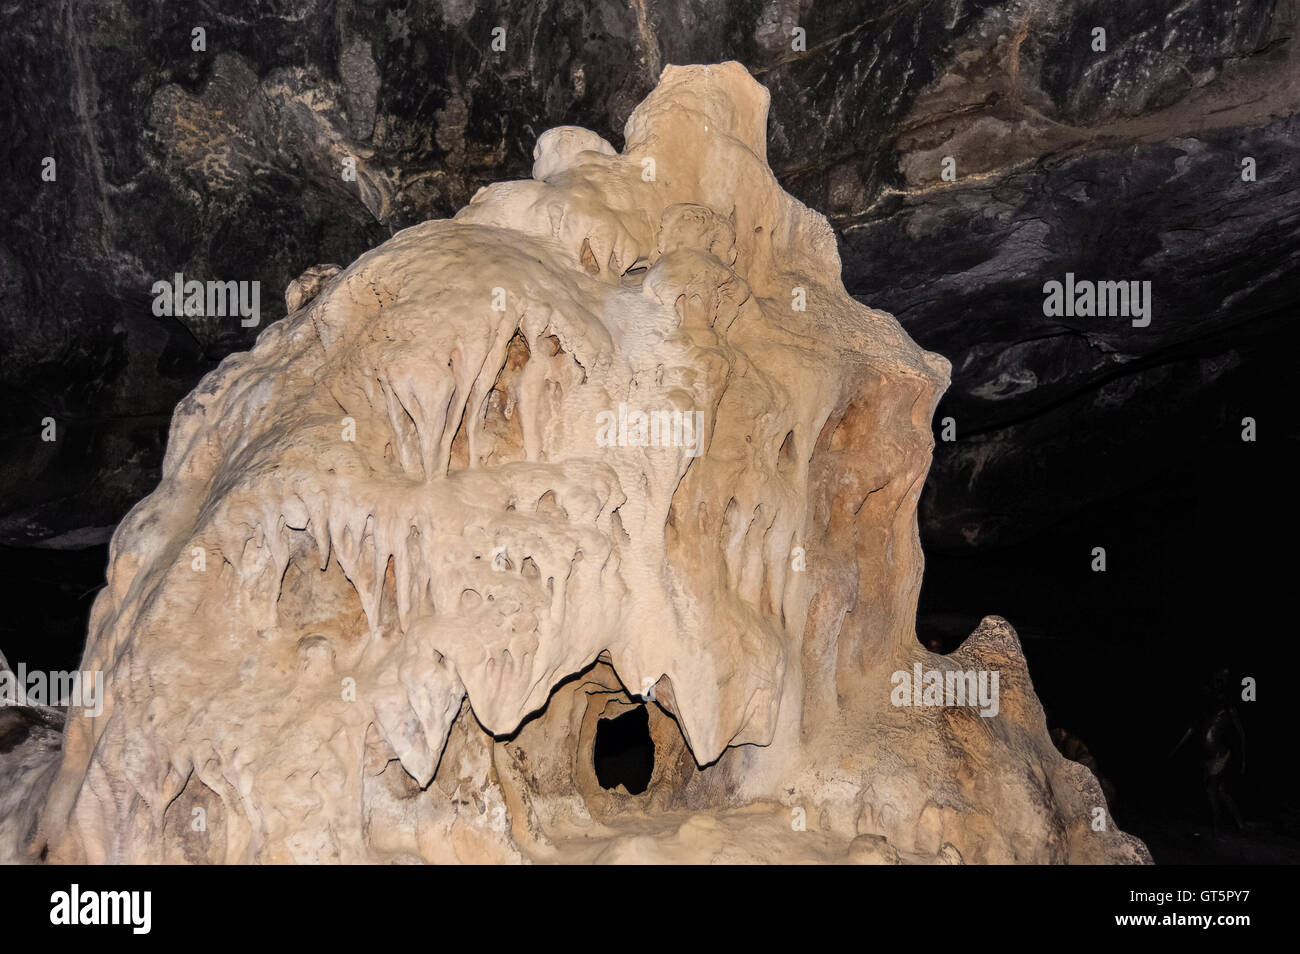 The Cango Caves are located at the foothills of the Swartberg range near the town of Oudtshoorn, South Africa. Stock Photo